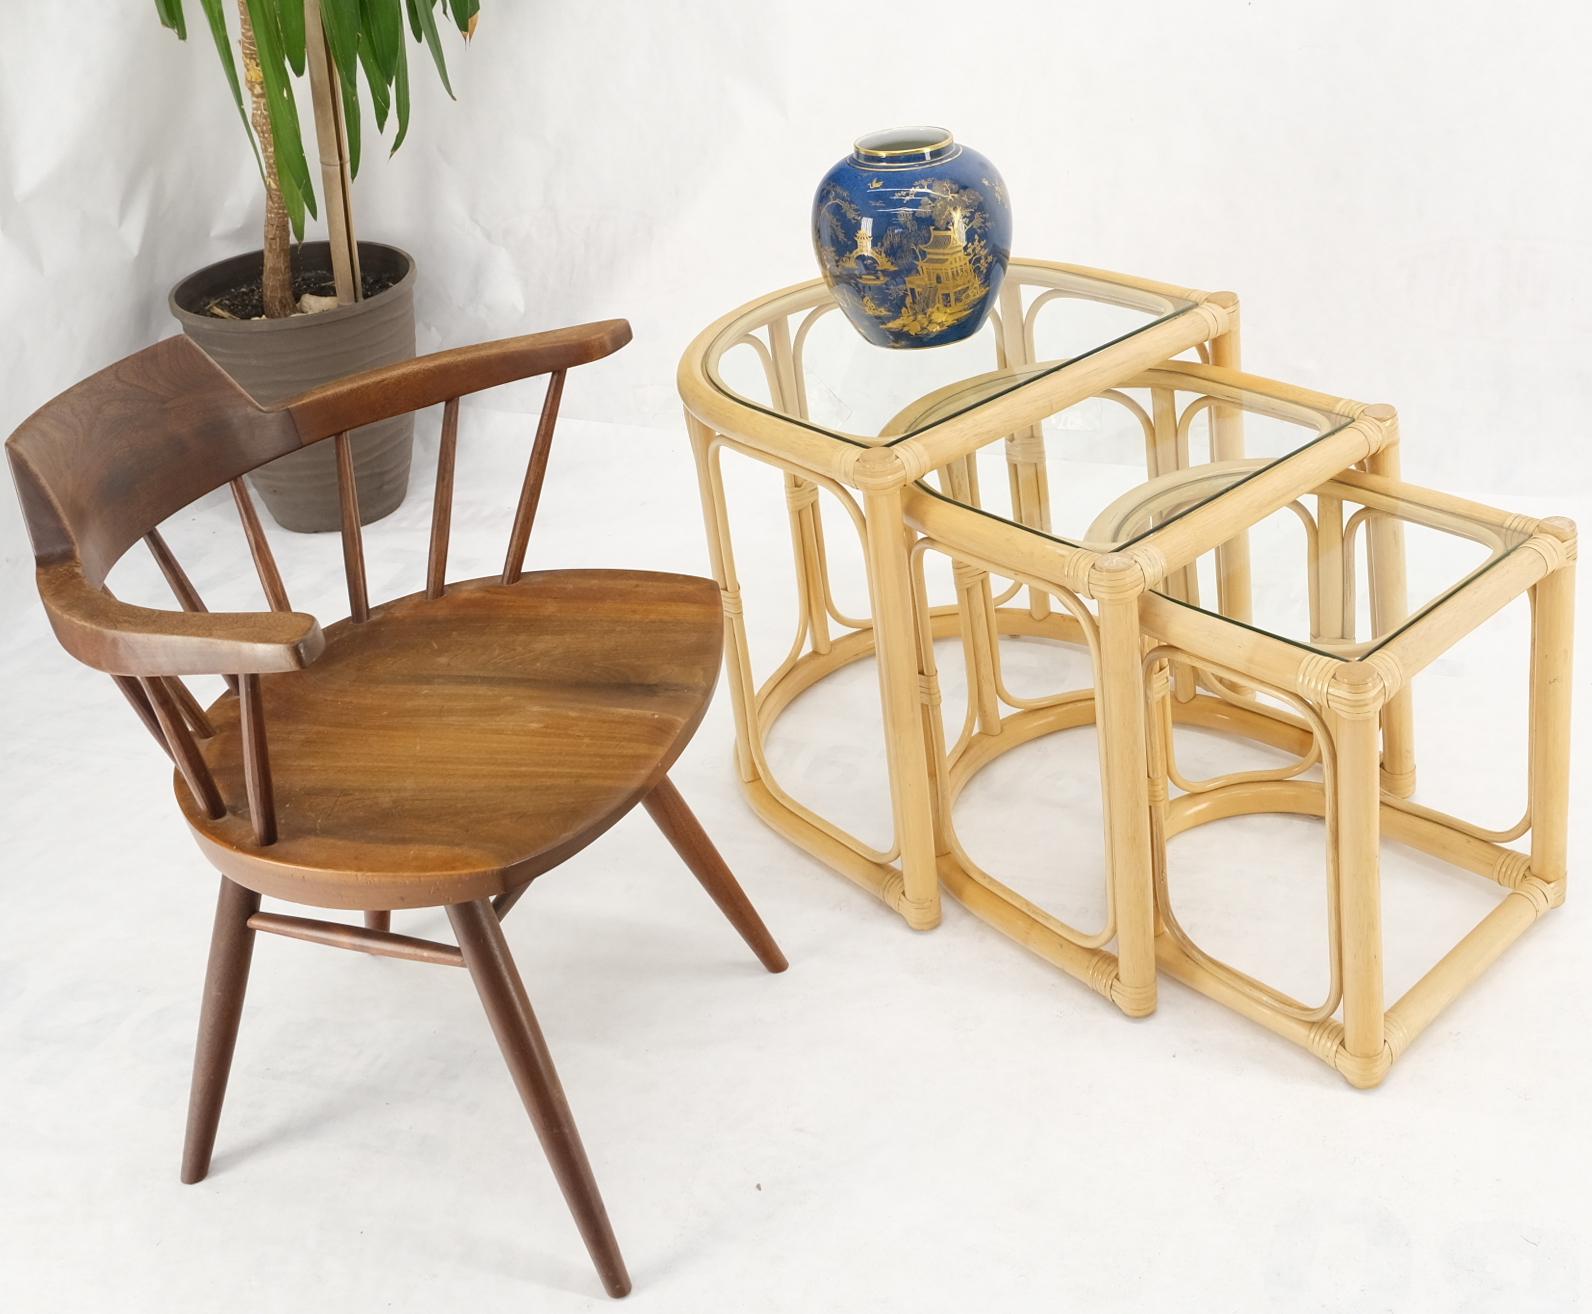 Bent reed bamboo rattan set of three stacking end side occasional tables stands.